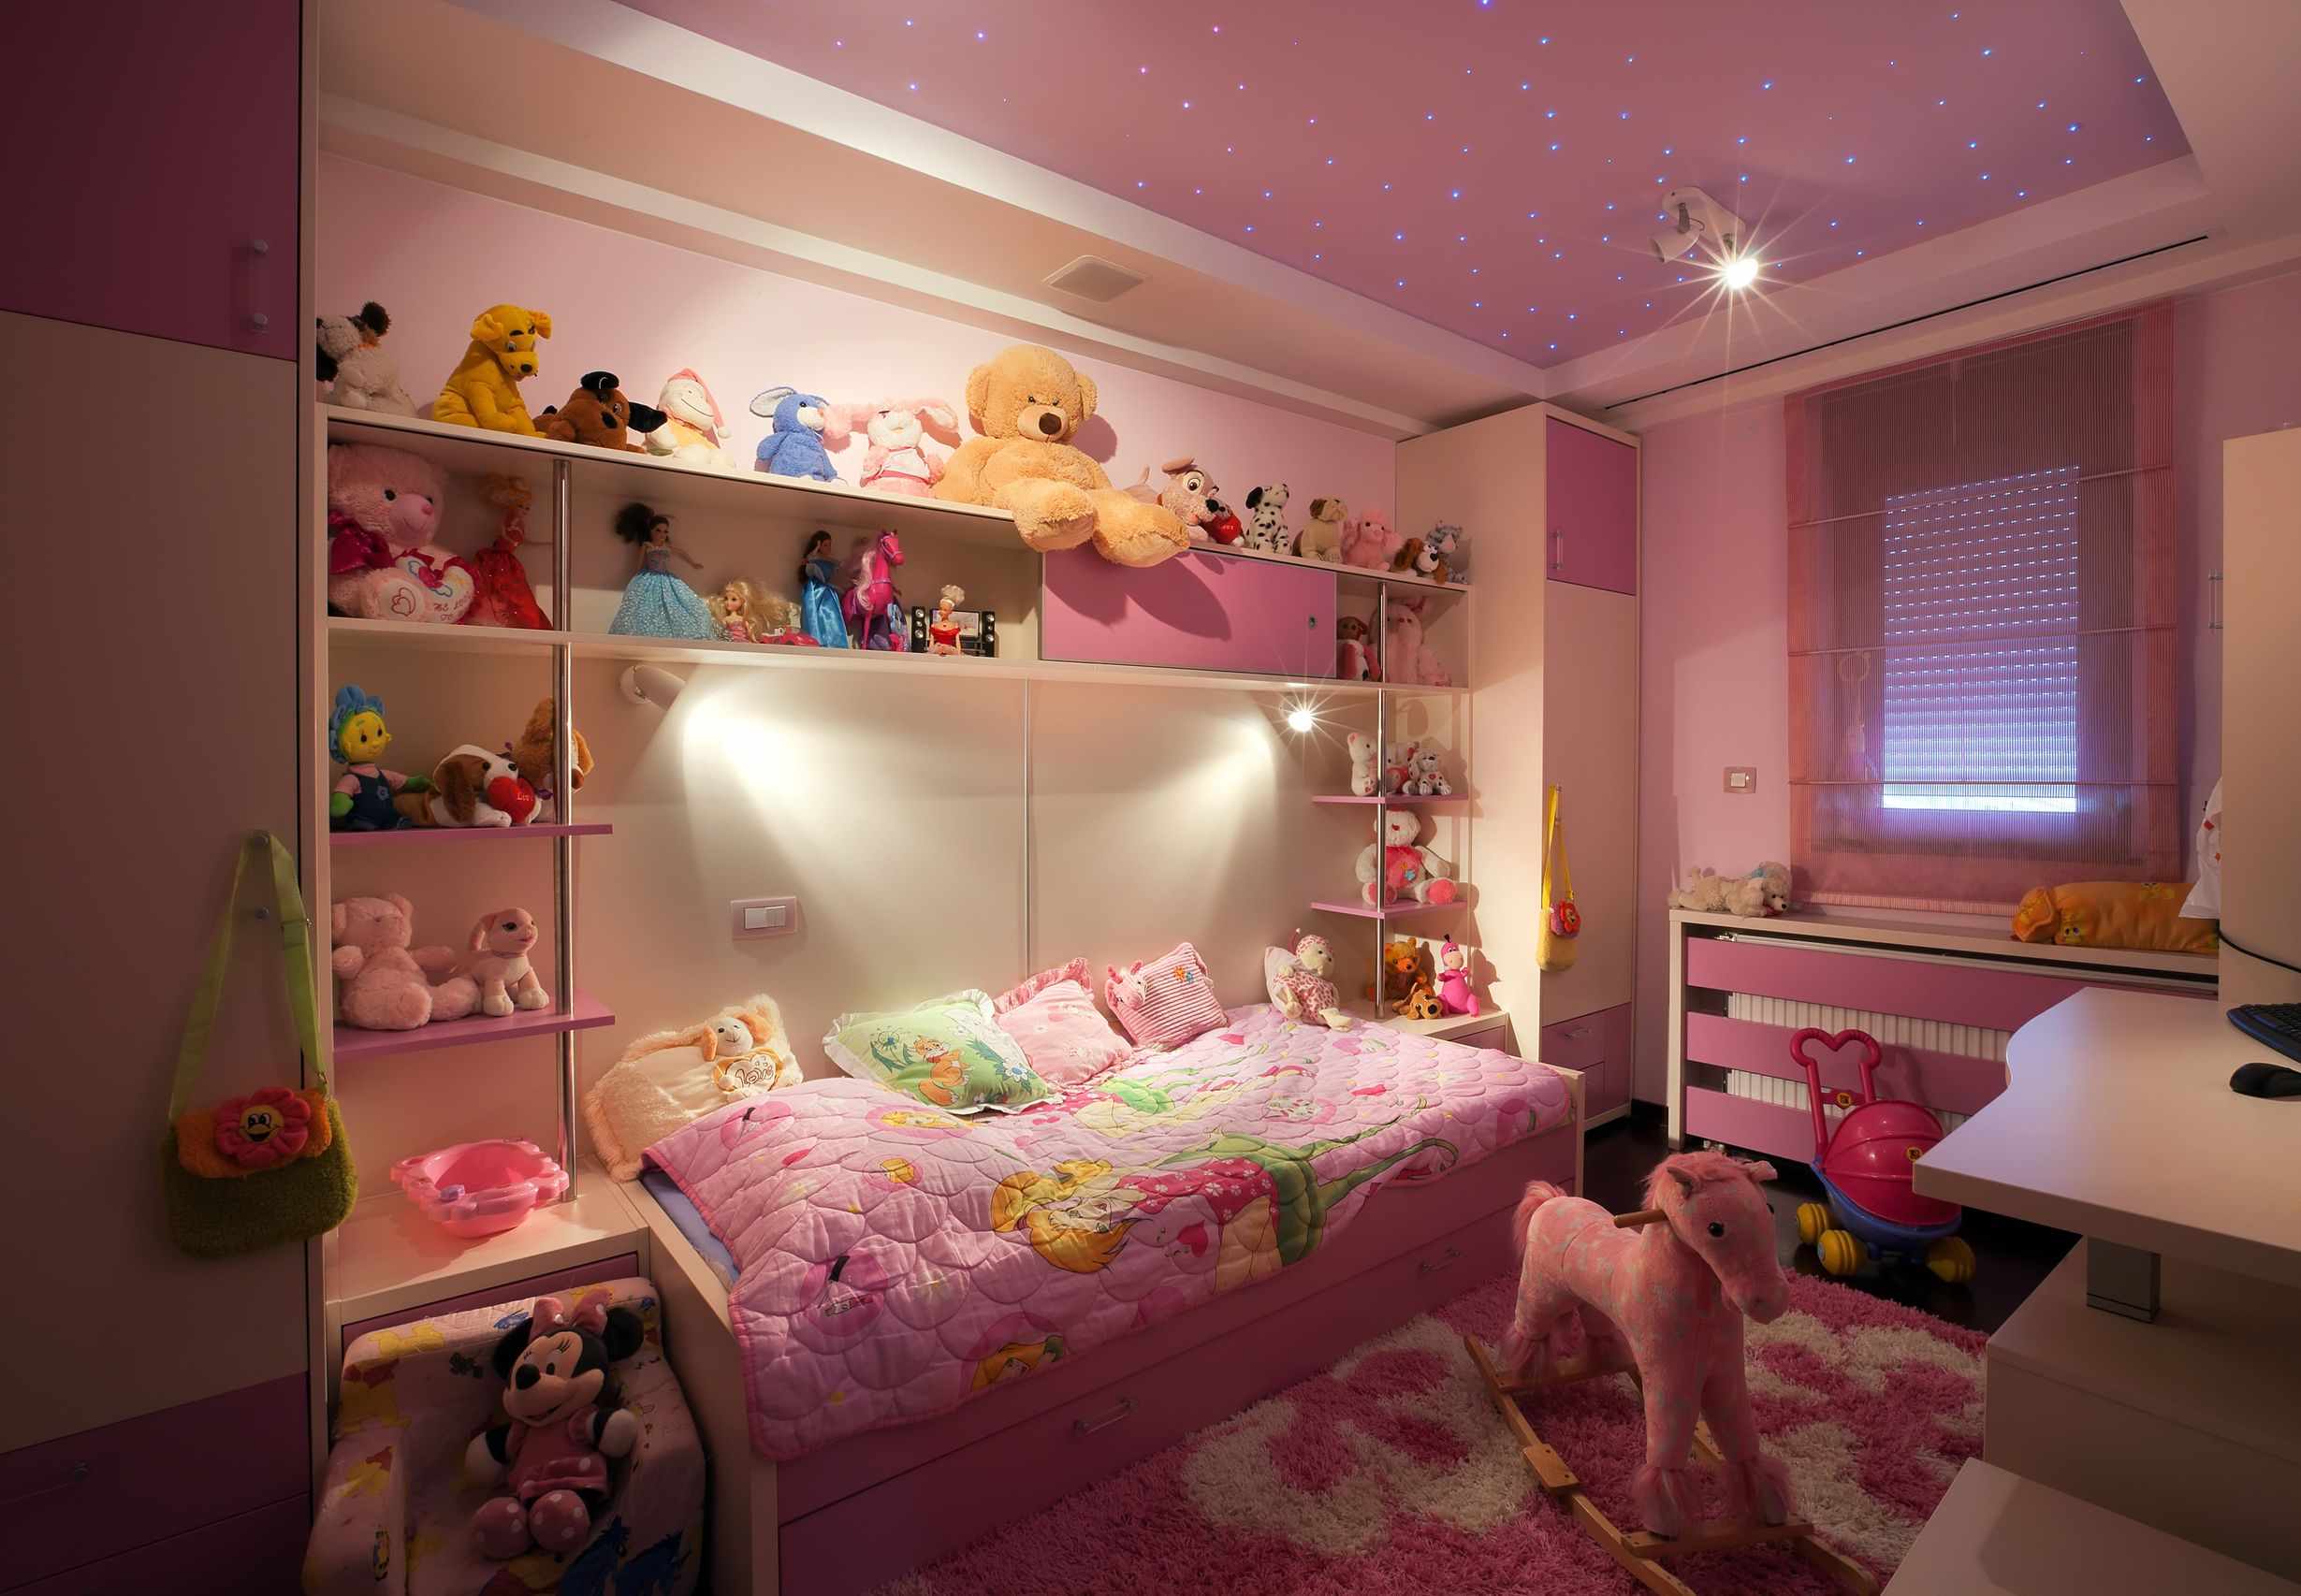 An example of a bright bedroom interior for a girl